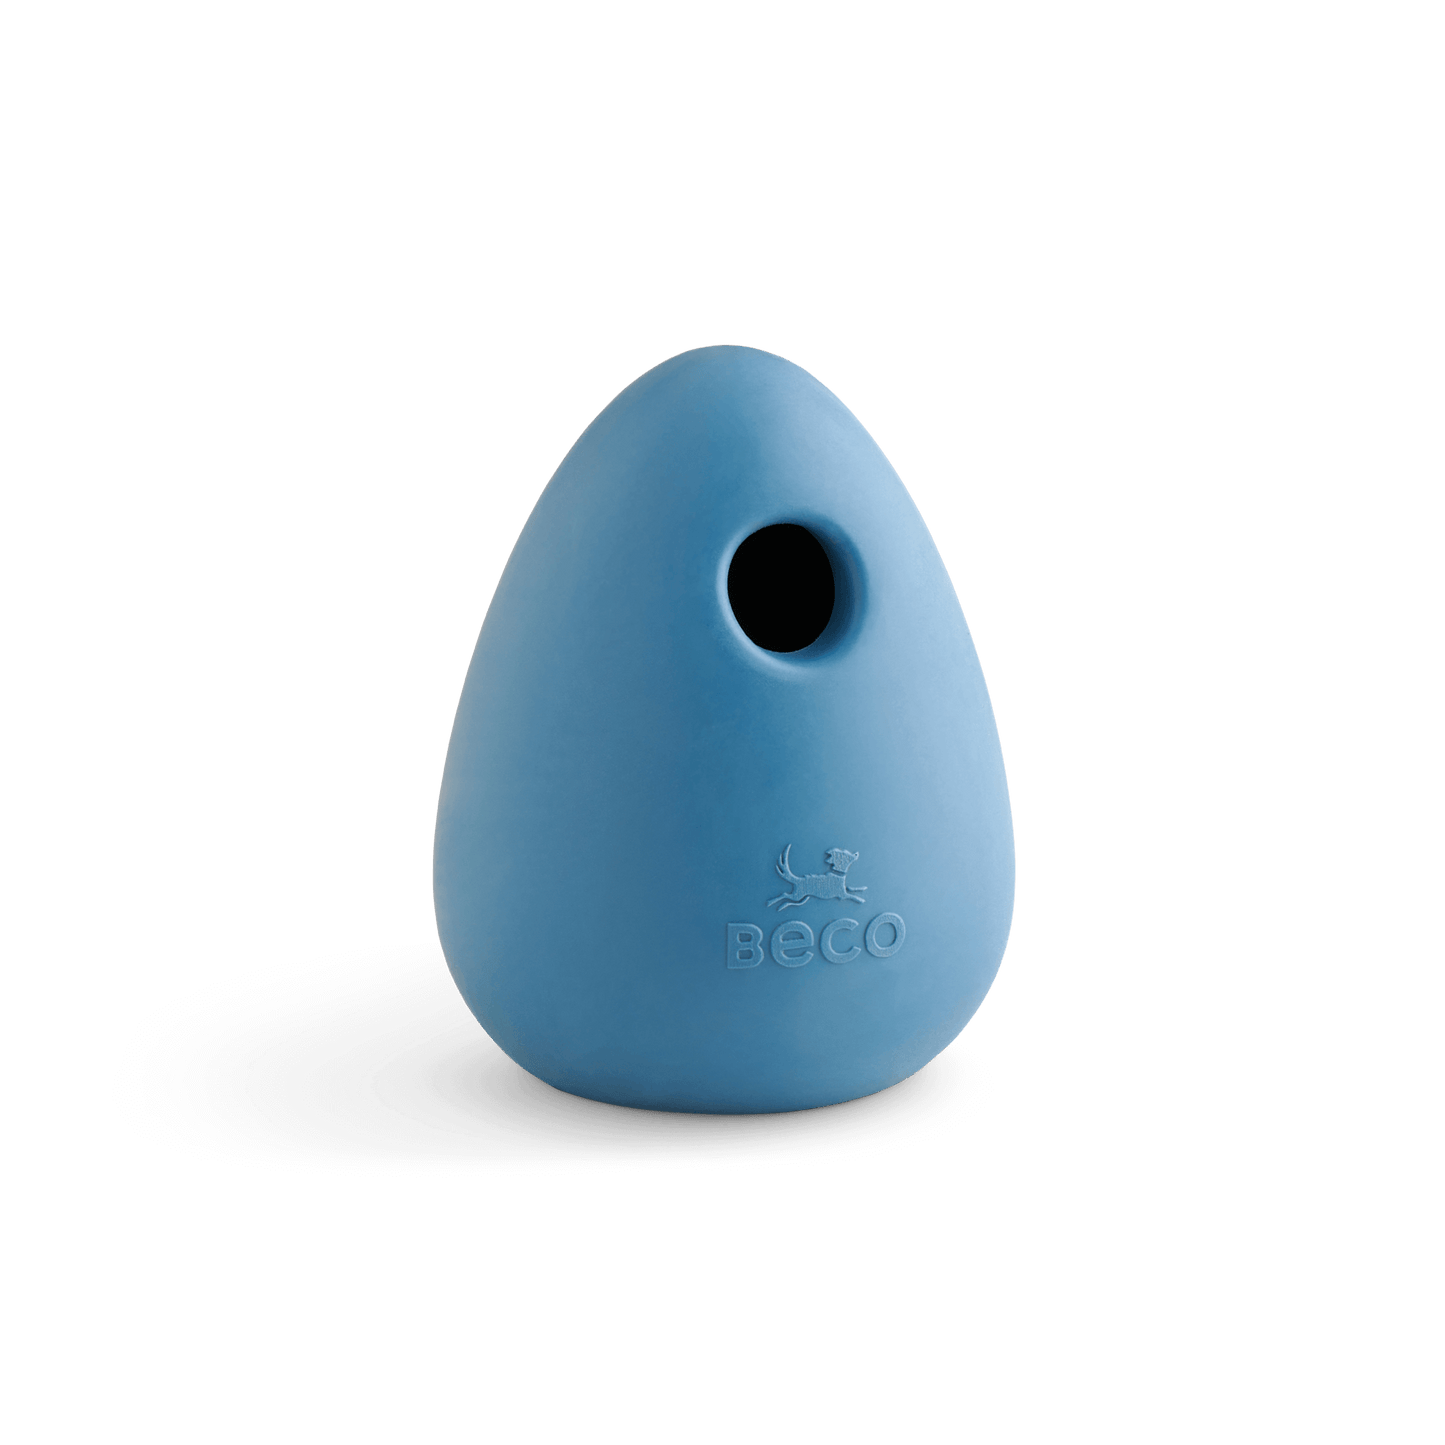 Beco Rubber Boredom Buster Enrichment Toy